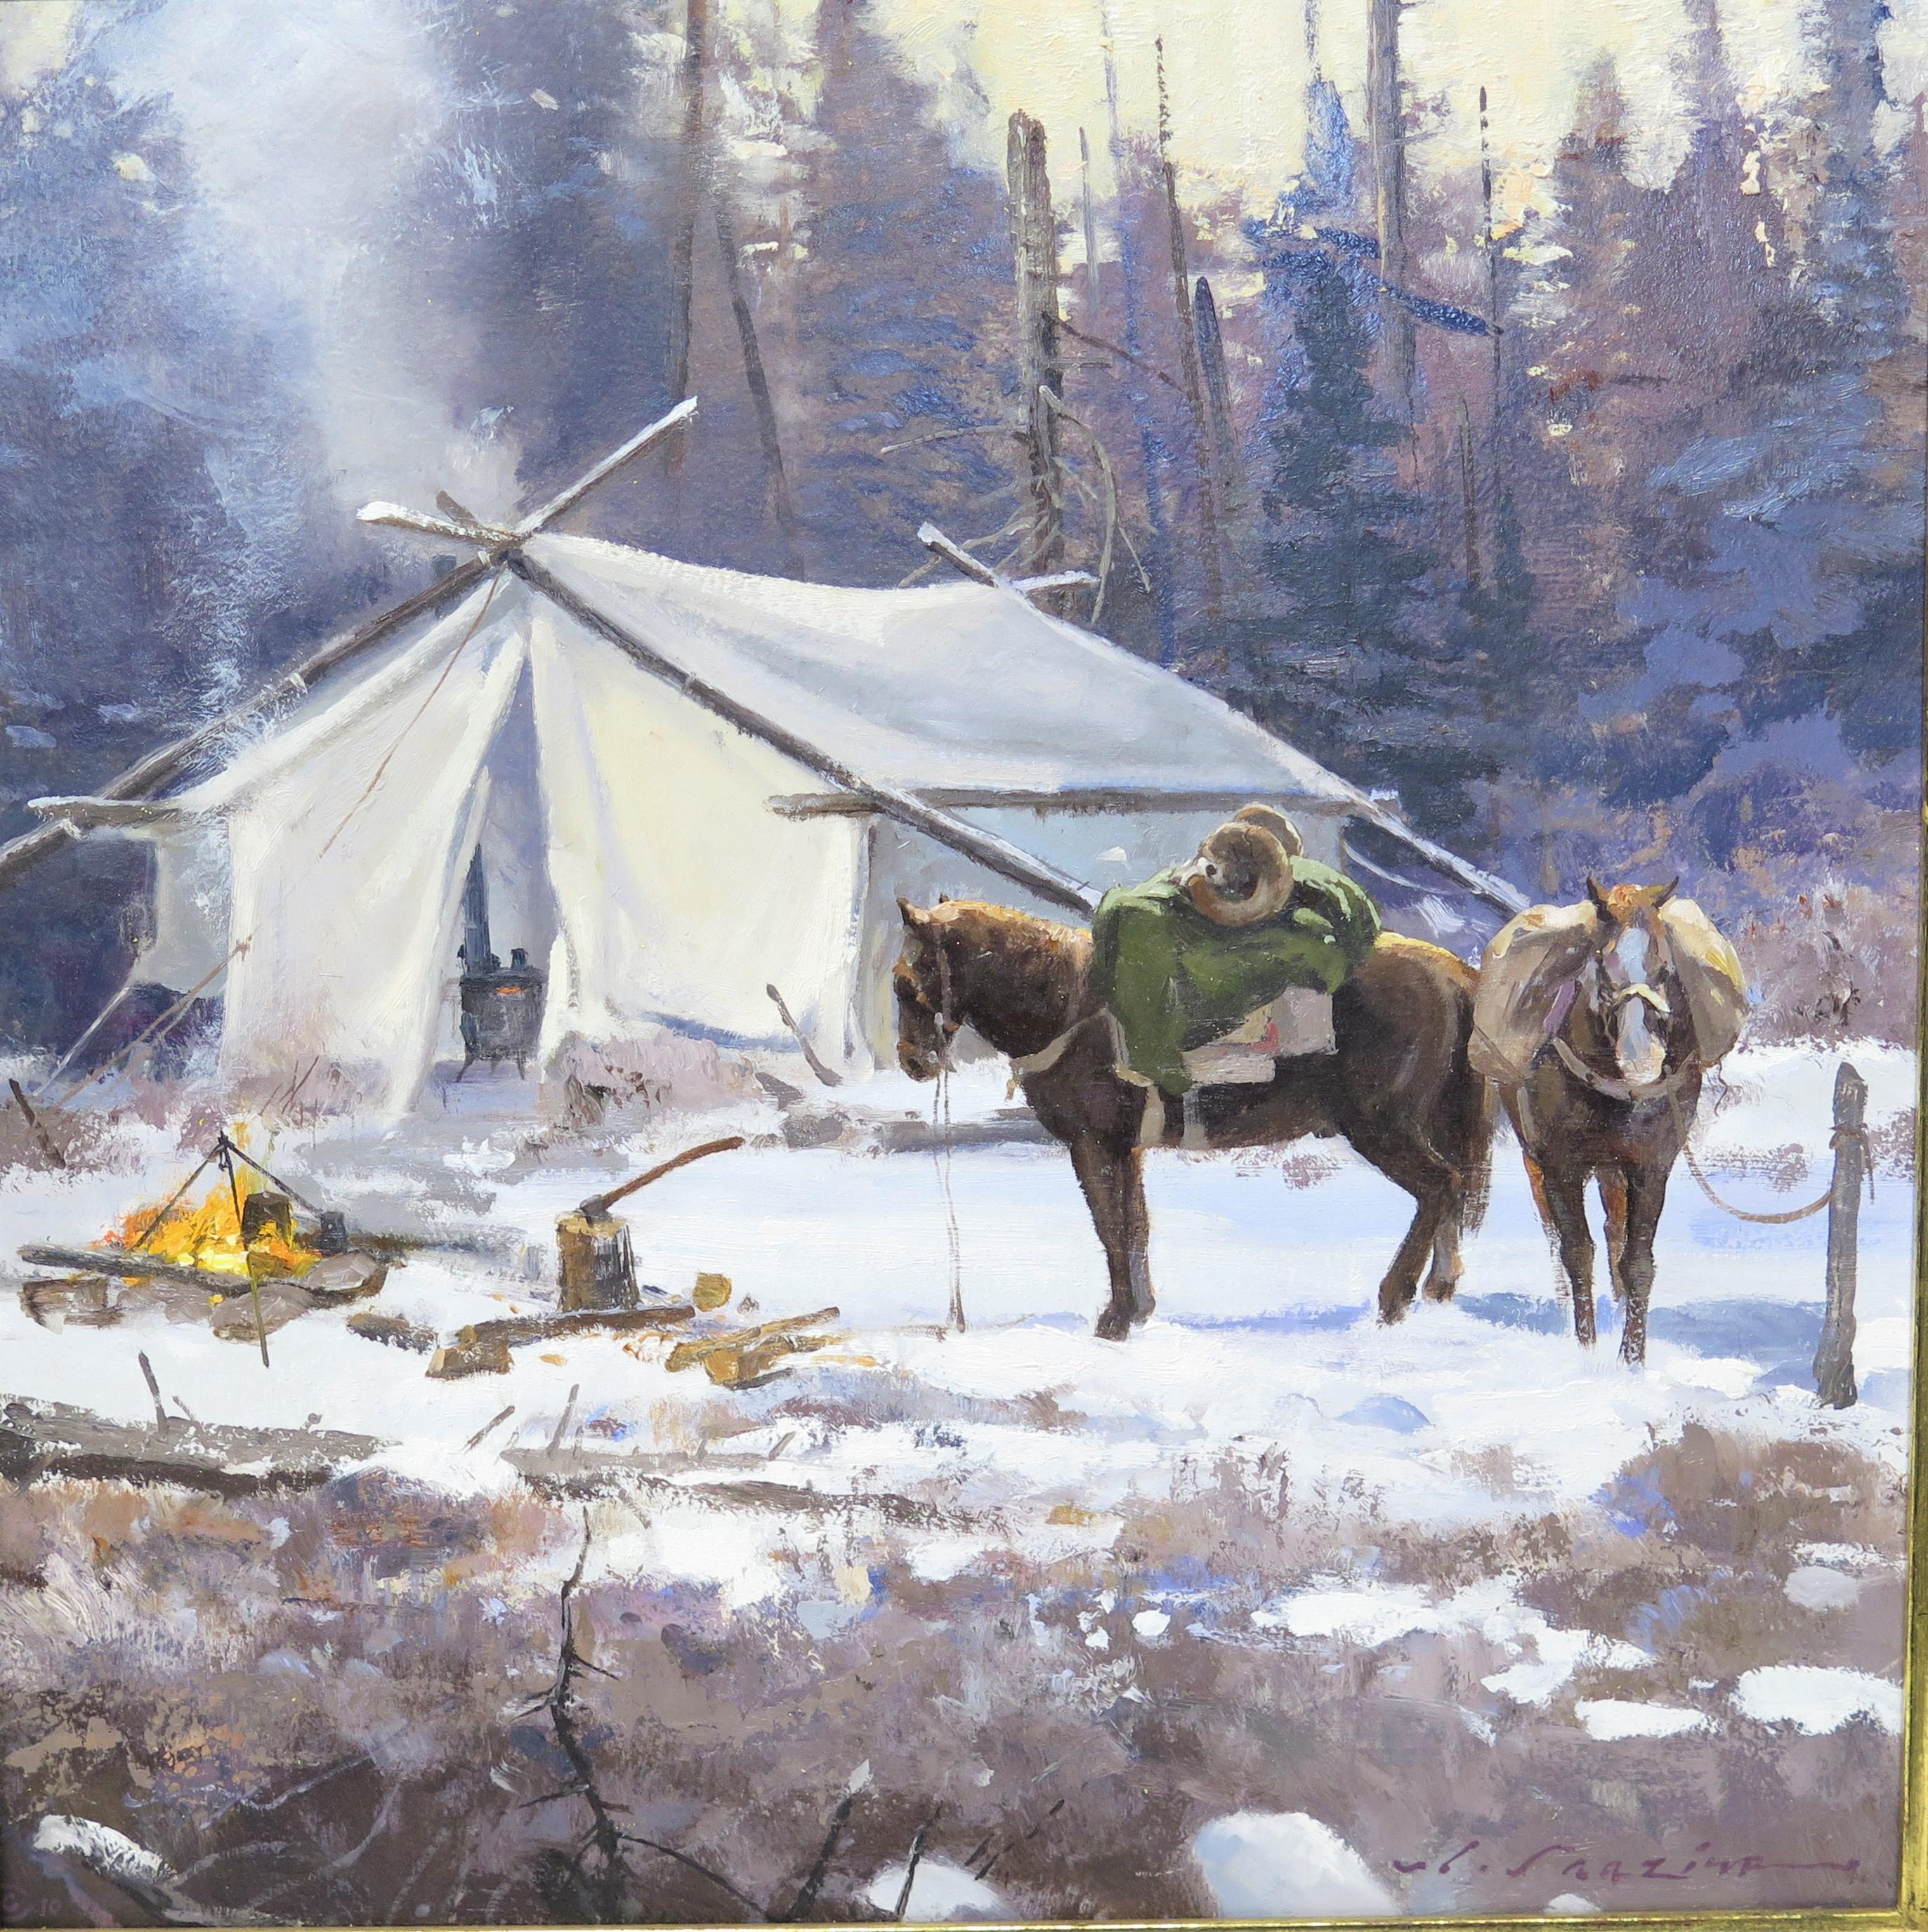 A Long Days Ride, 2010 by Luke Frazier (American, 1970) signed front lower right. camp set up in the snow with two horses outside a tent, a simple meal cooks on the campfire. oil on canvas, handsome gilt frame with label, United States, 2010

label